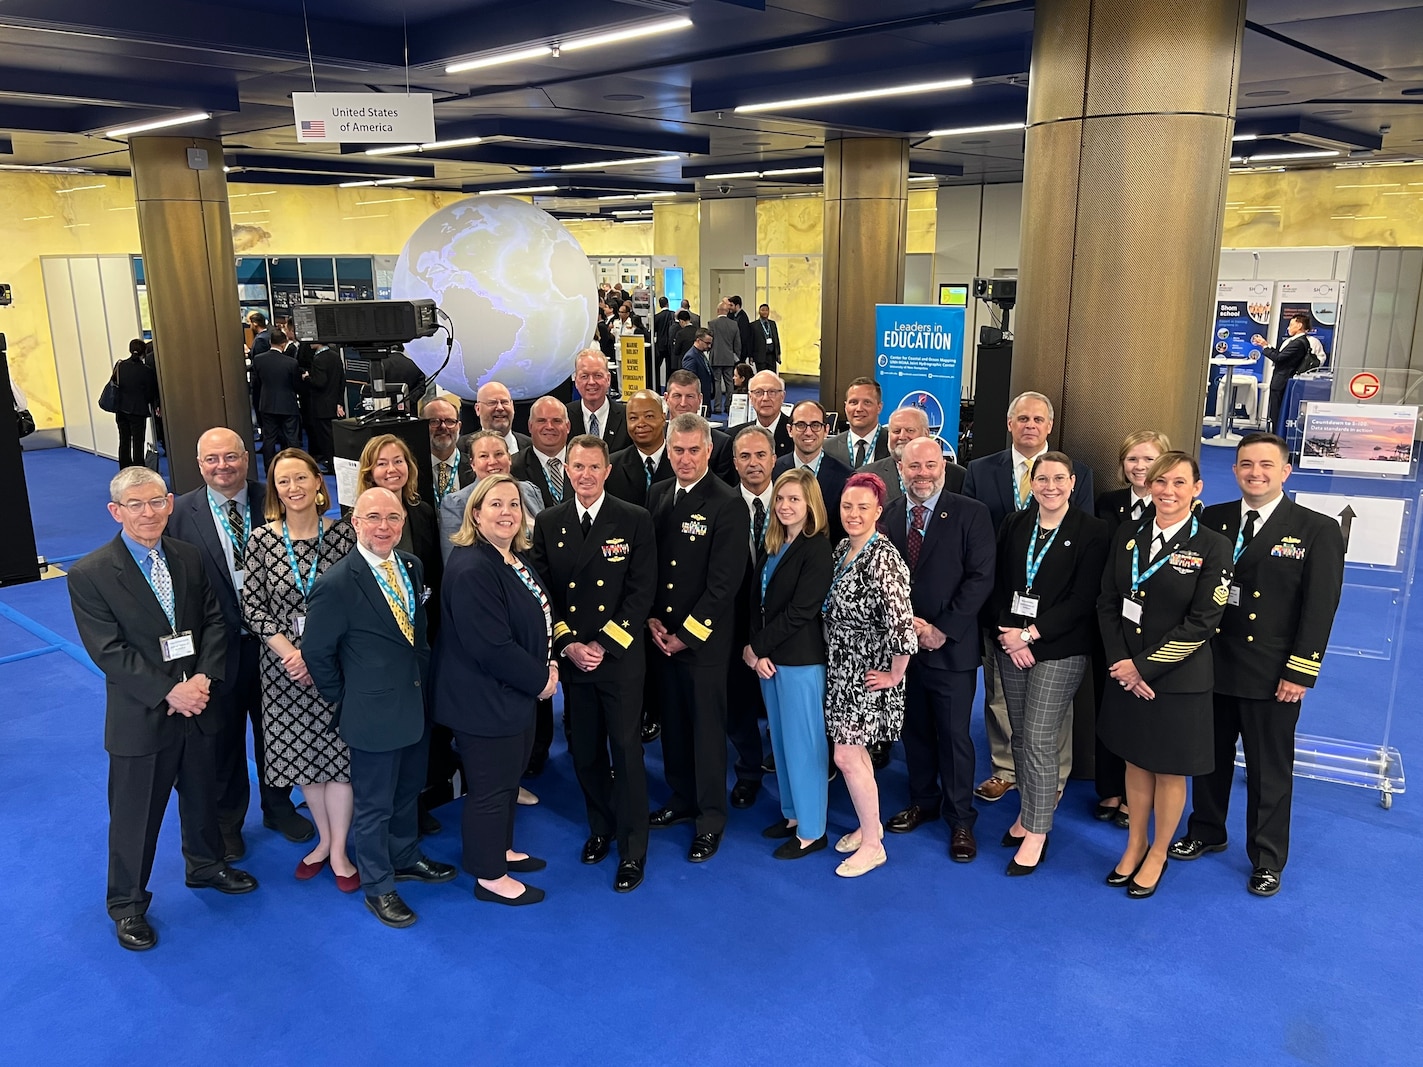 U.S. Delegation, lead by Rear Admiral Ron Piret, poses for a photo at the U.S. Booth during the International Hydrographic Organization Assembly 2023.